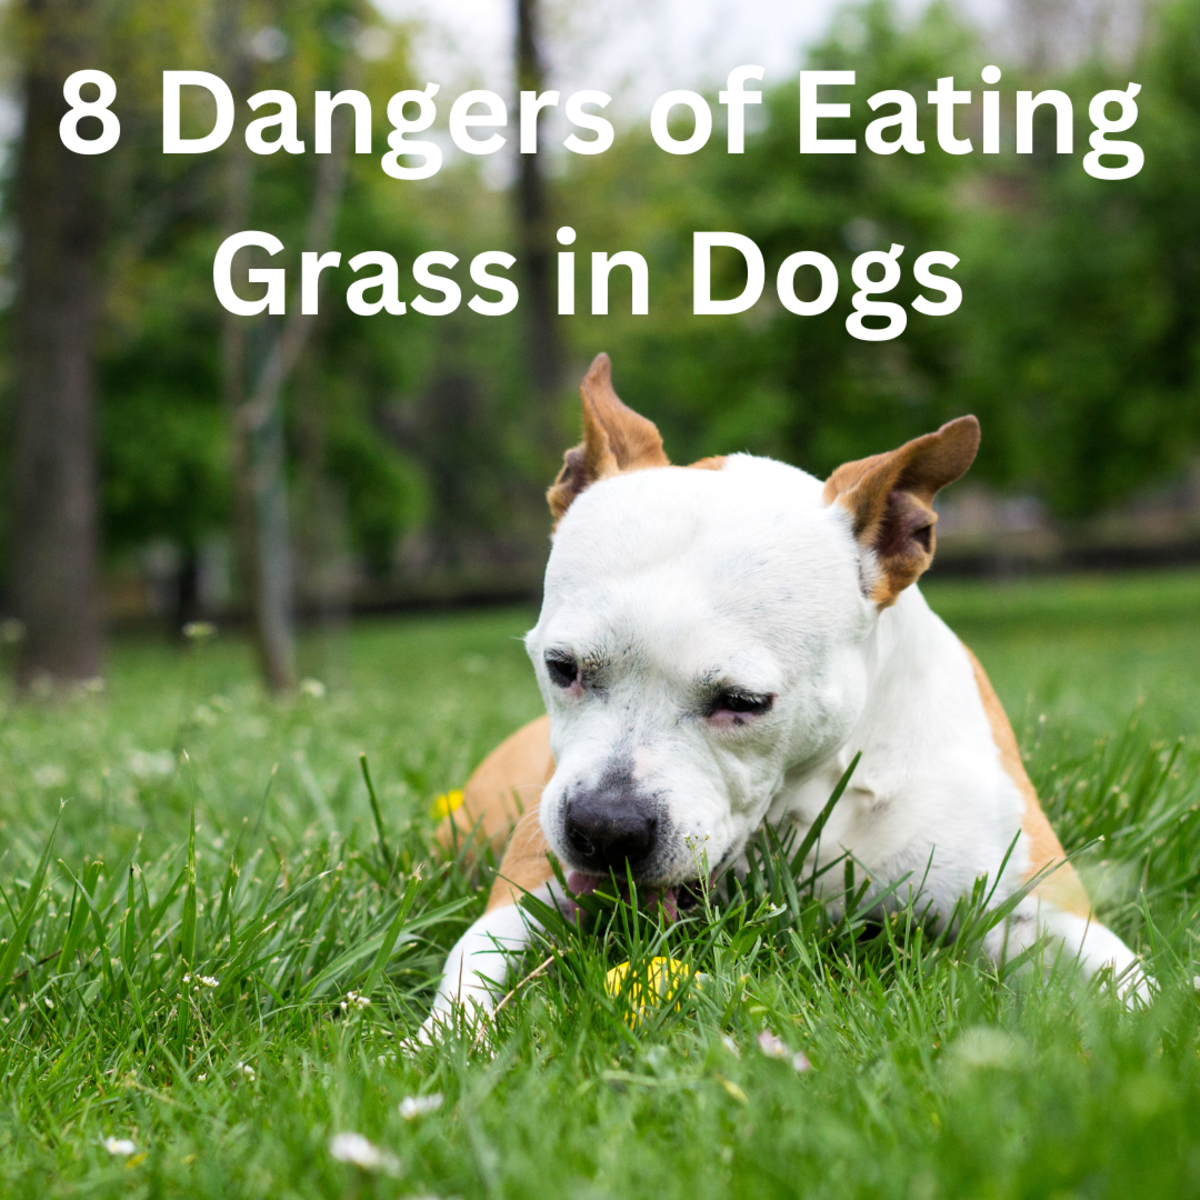 Should I Let My Dog Eat Grass? 8 Dangers to Be Aware Of